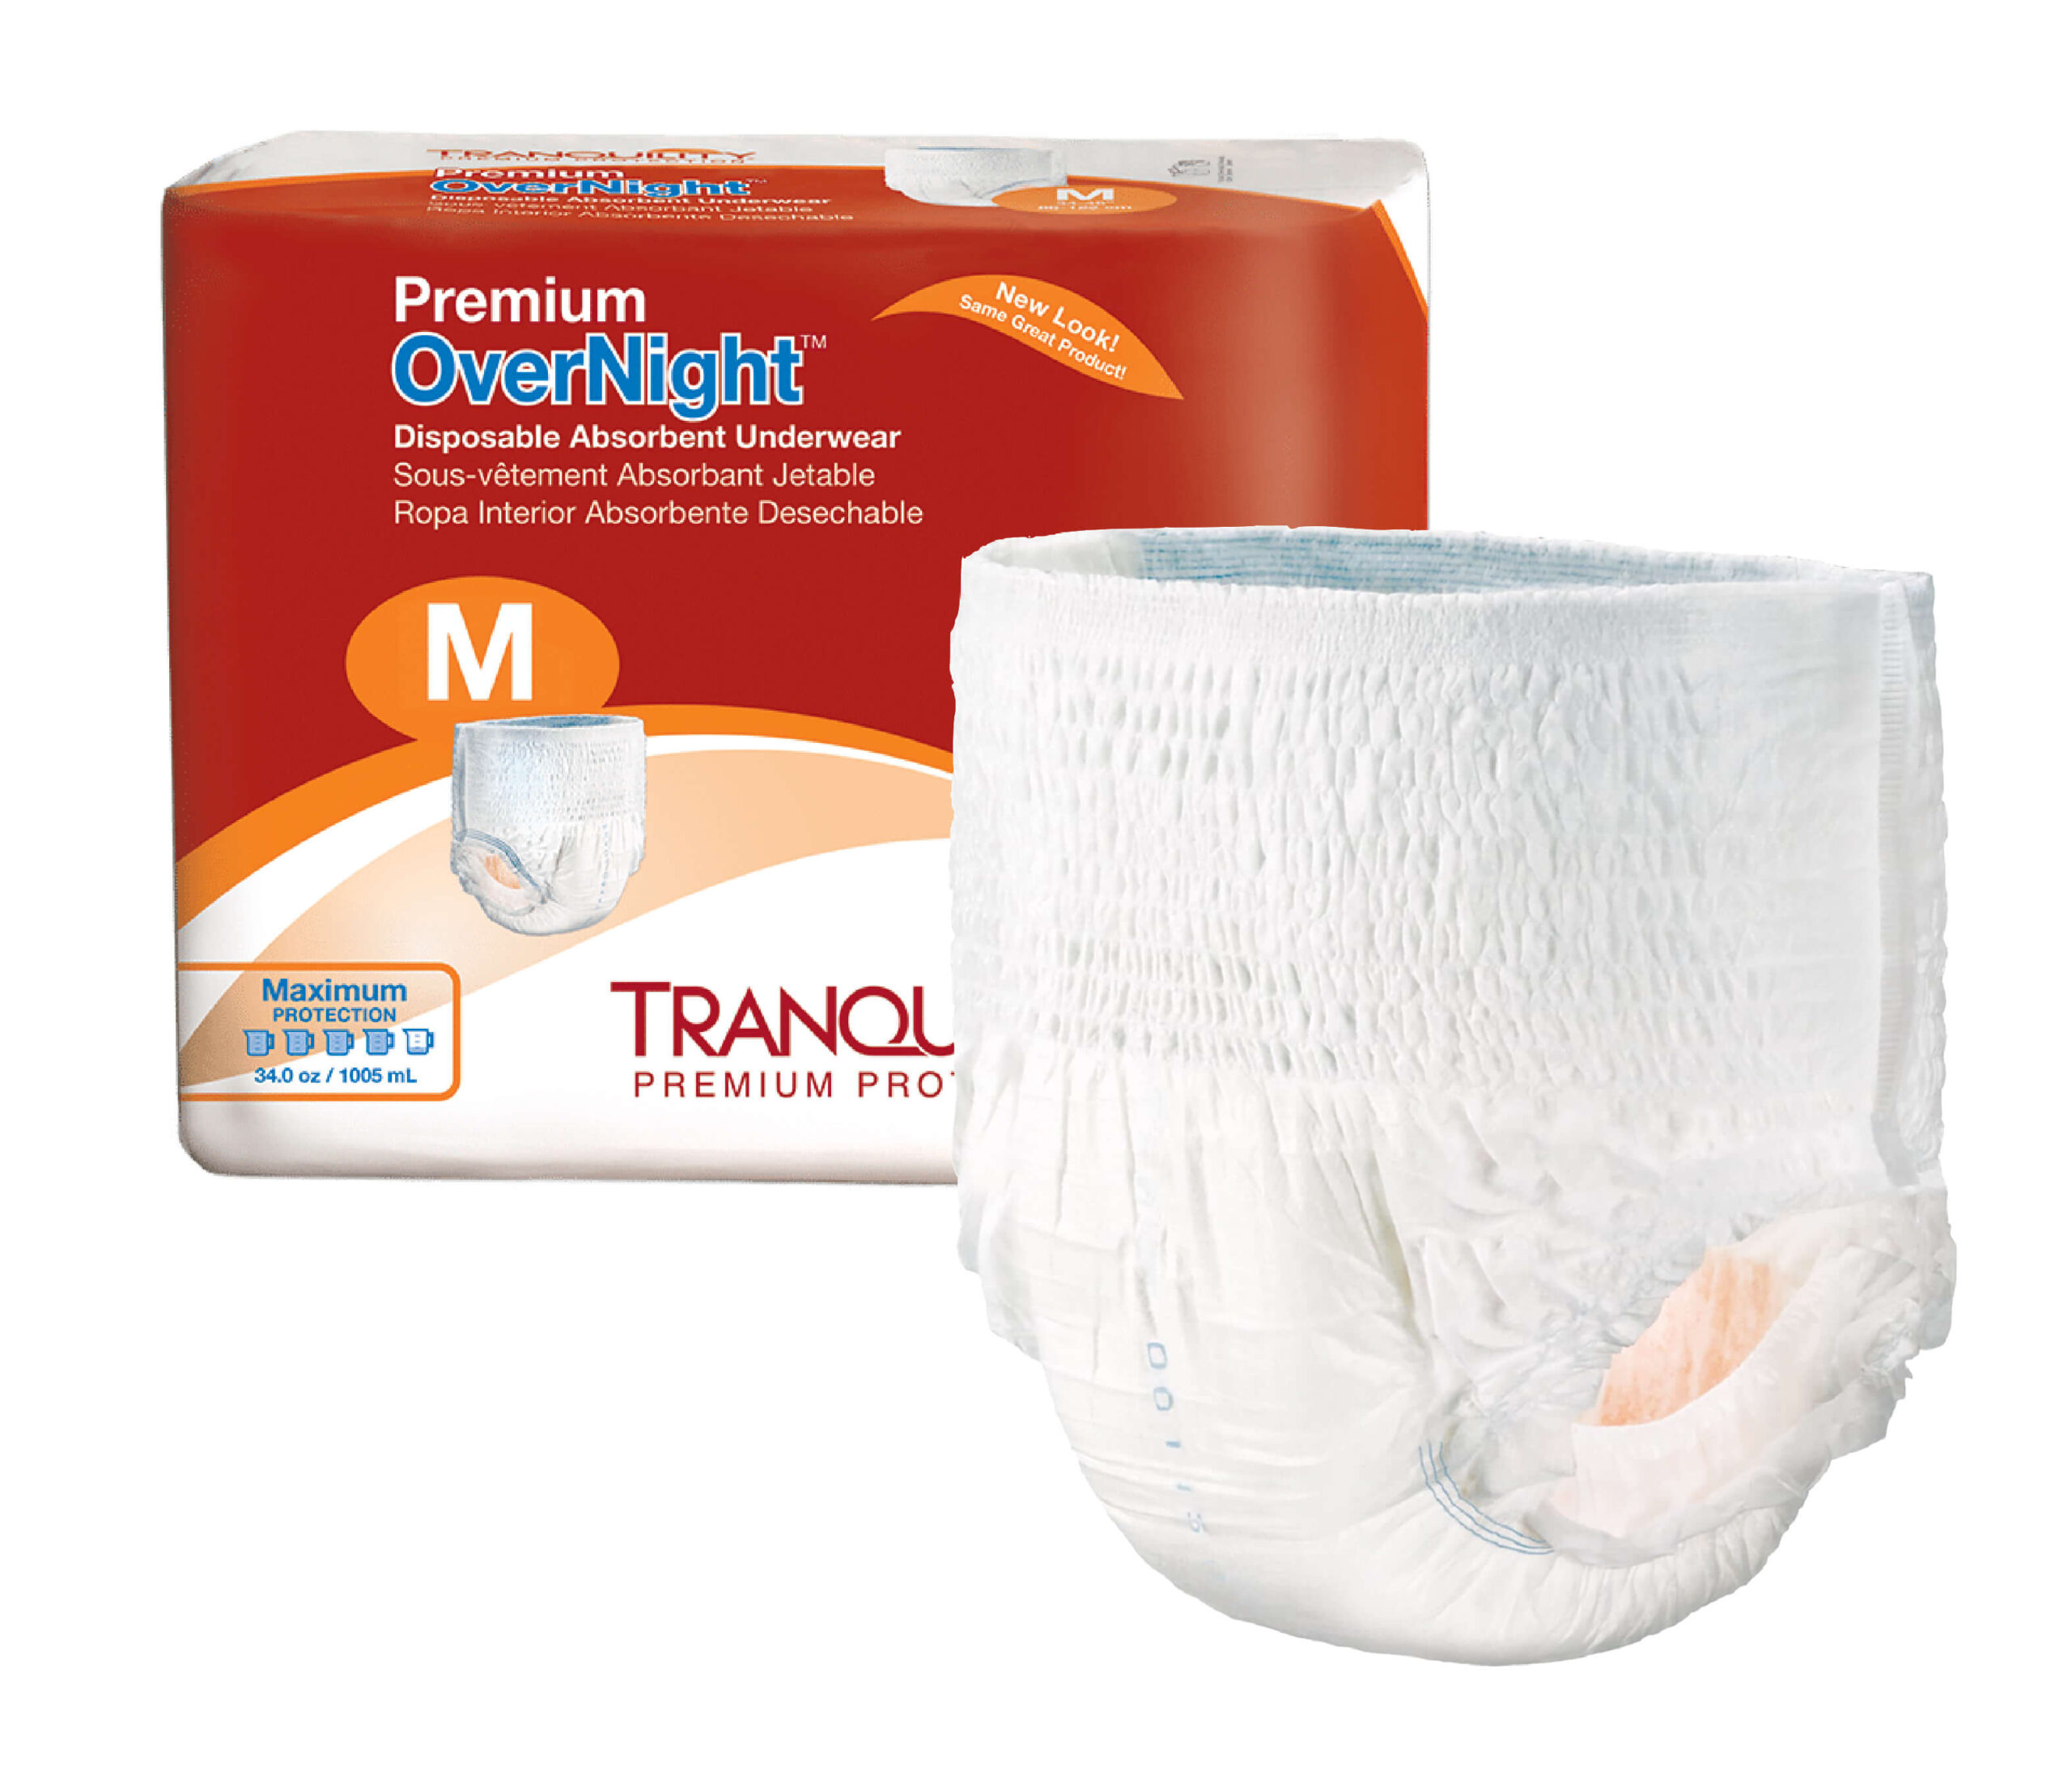 Protect Absorbent Diapers, Adult Diapers